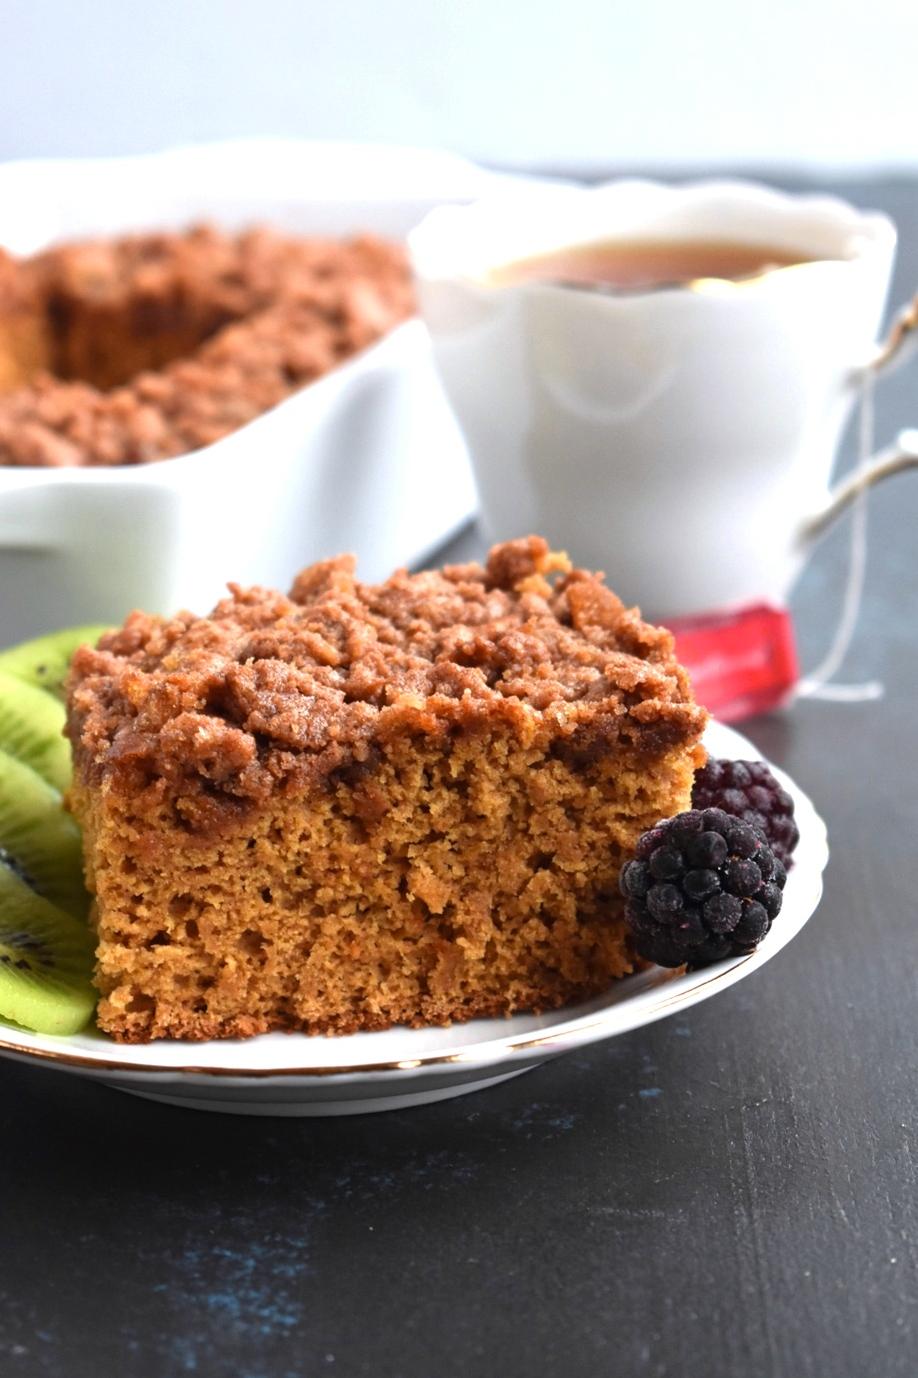 Indulge In a Heavenly Sliced Whole Wheat Coffee Cake Today